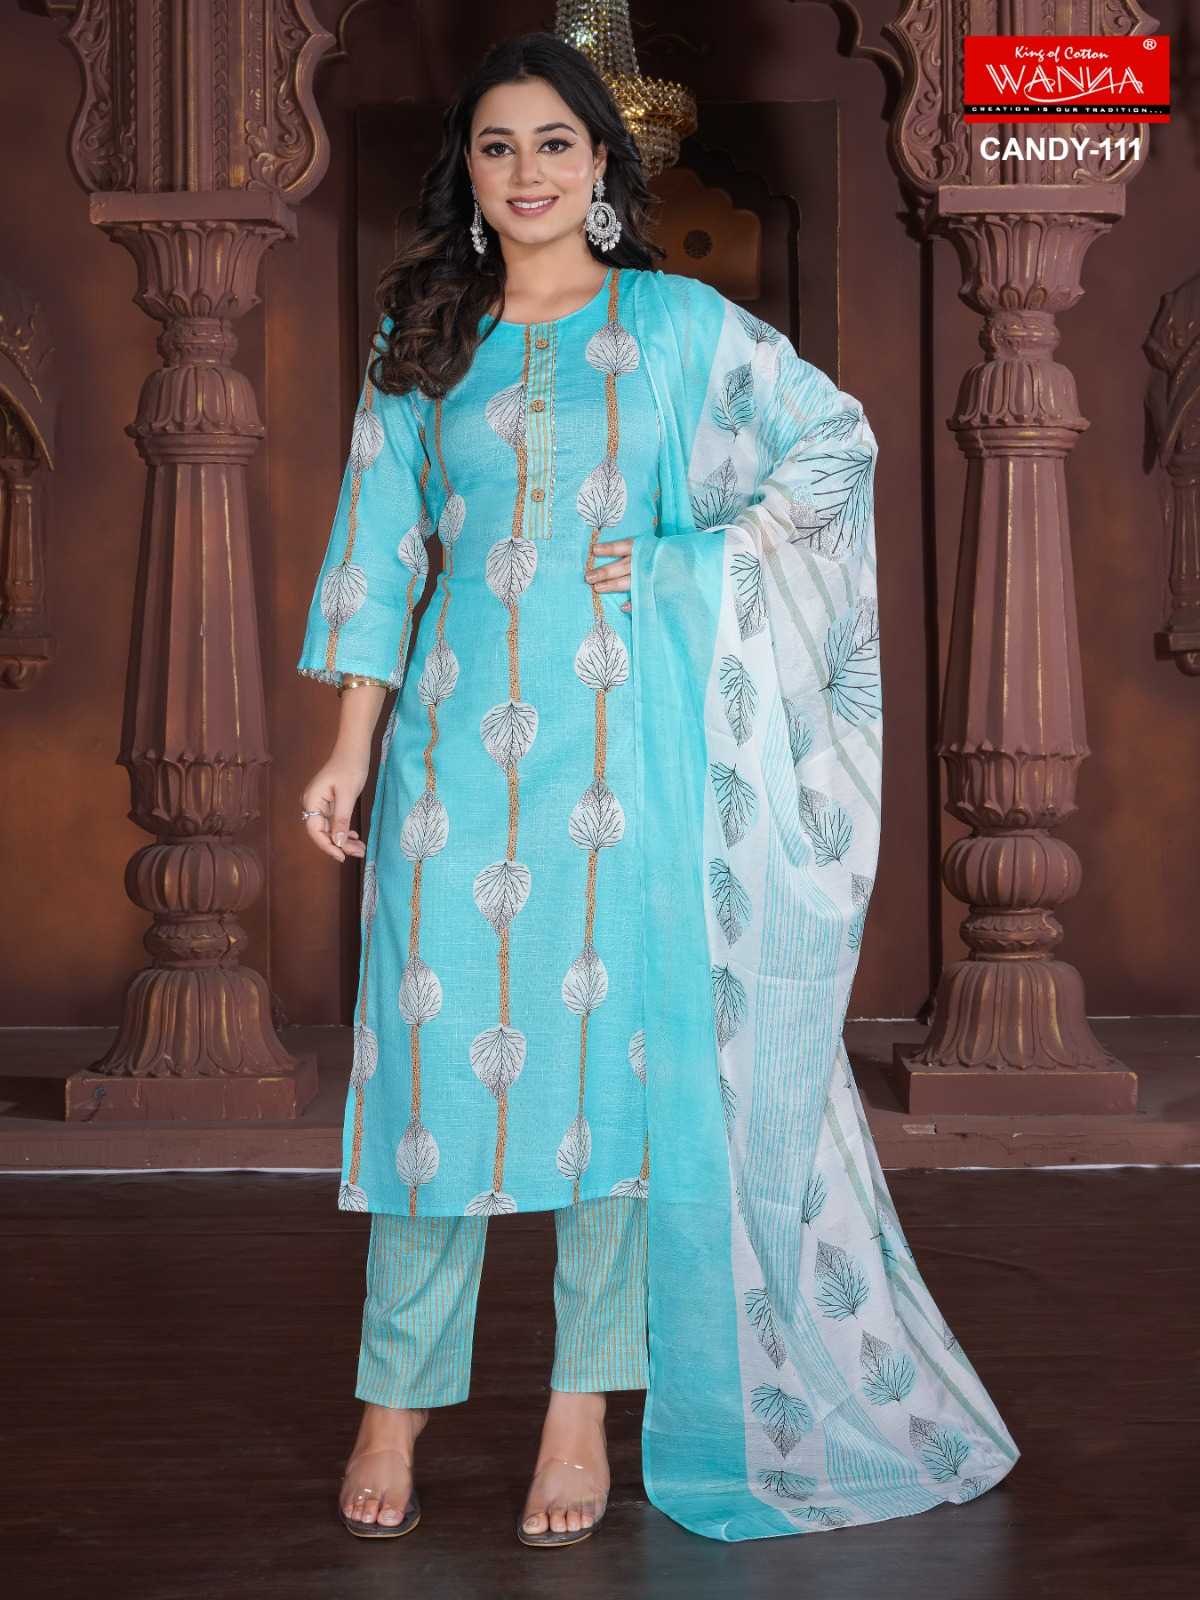 wanna candy launch beautiful look two tone cotton full stitch salwar suit combo set